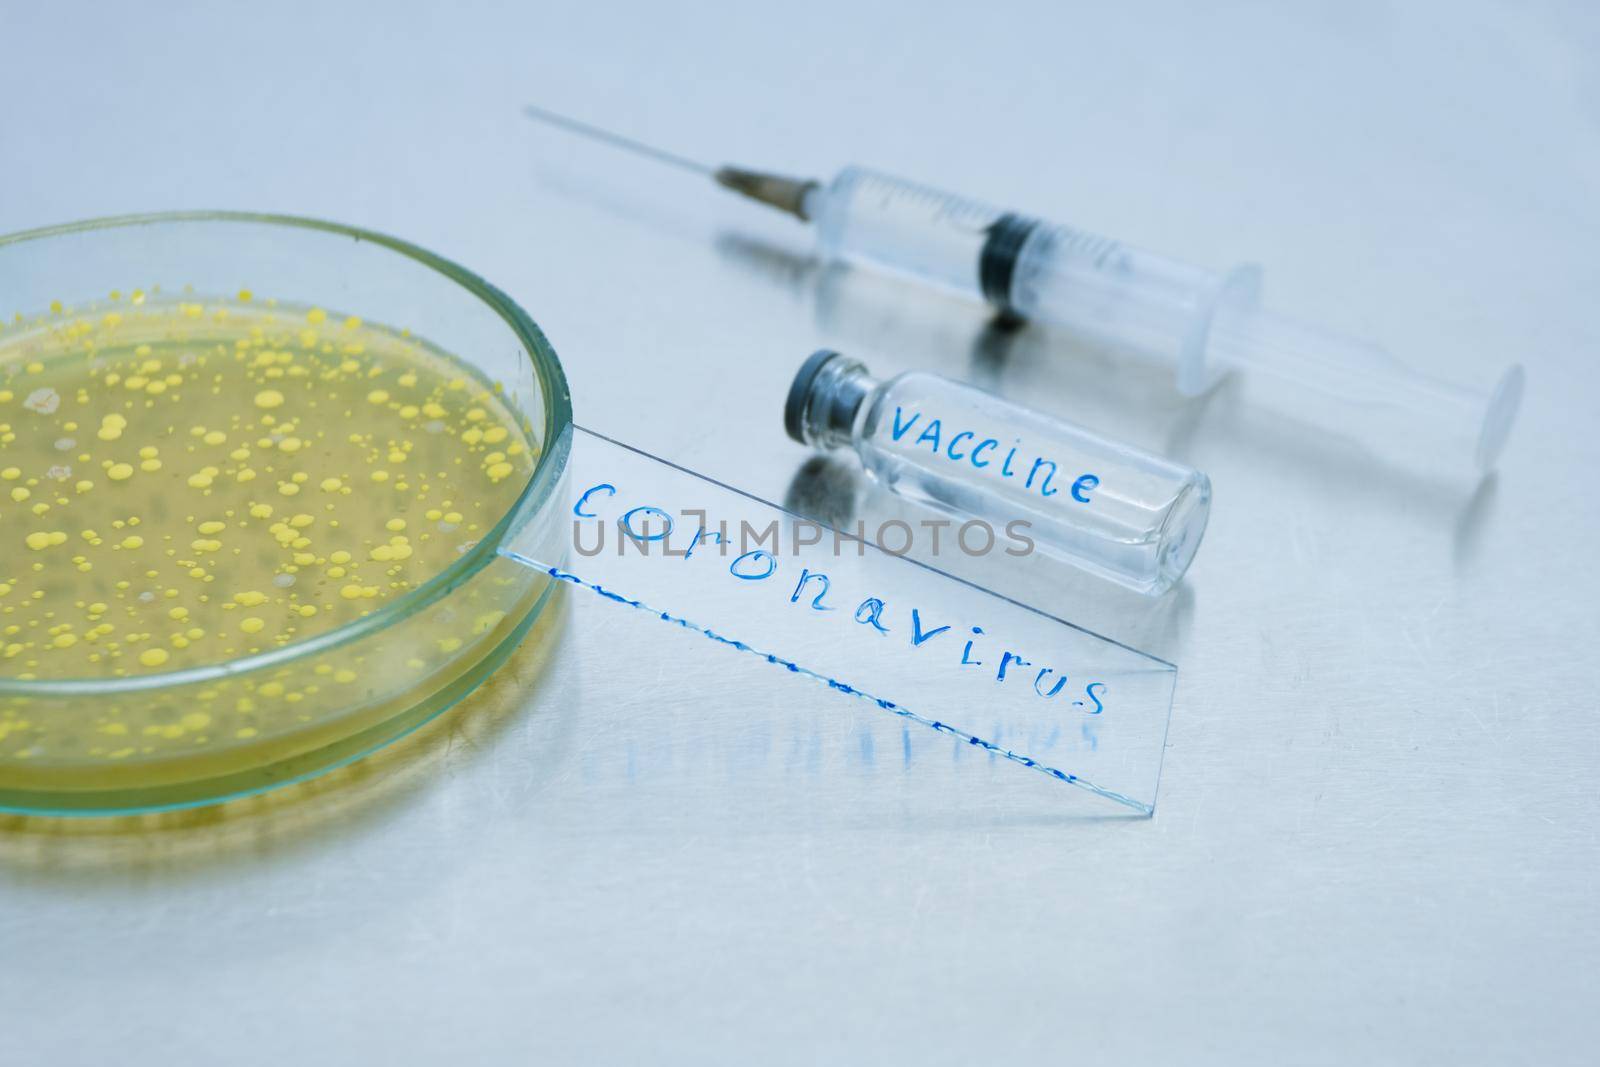 On a metal table is a Petri dish with yellow bacteria, on it a glass slide, a bottle with a vaccine and a syringe. Using bacteria to develop a coronavirus vaccine.